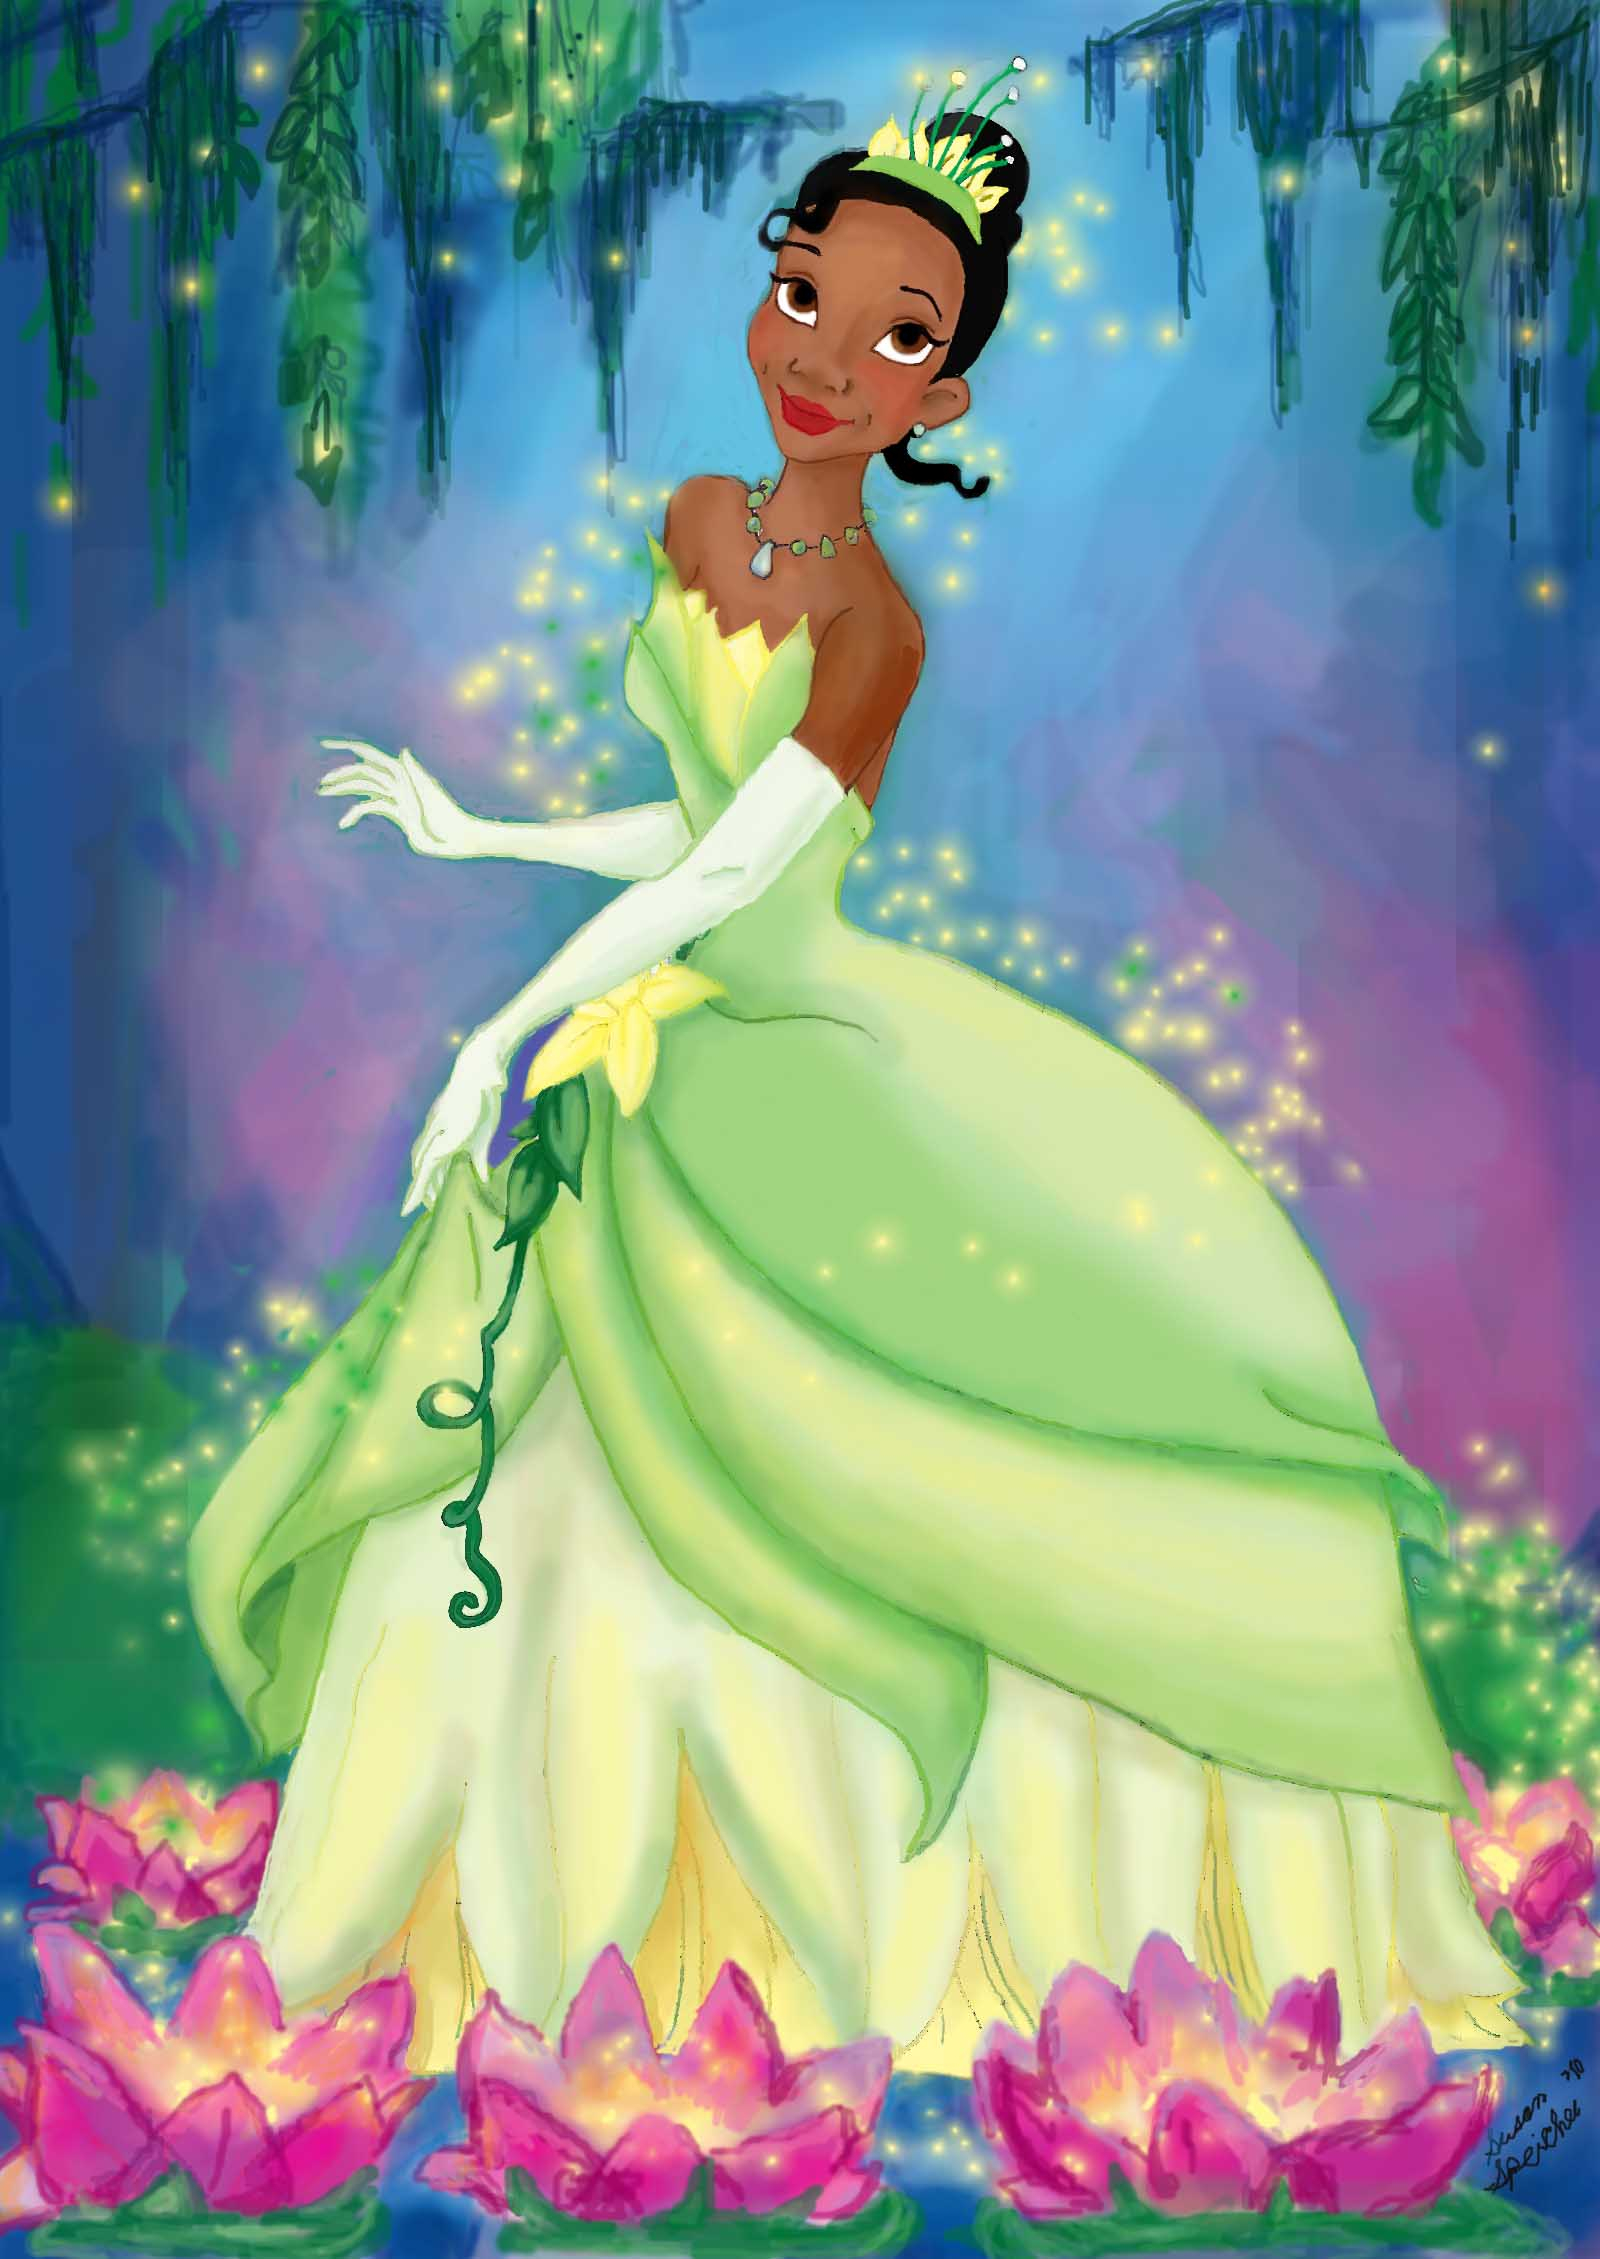 1600x2259 princess and the frog wallpaper Online Discount Shop for Electronics, Apparel, Toys, Books, Games, Computers, Shoes, Jewelry, Watches, Baby Products, Sports \u0026 Outdoors, Office Products, Bed \u0026 Bath, Furniture, Tools, Hardware